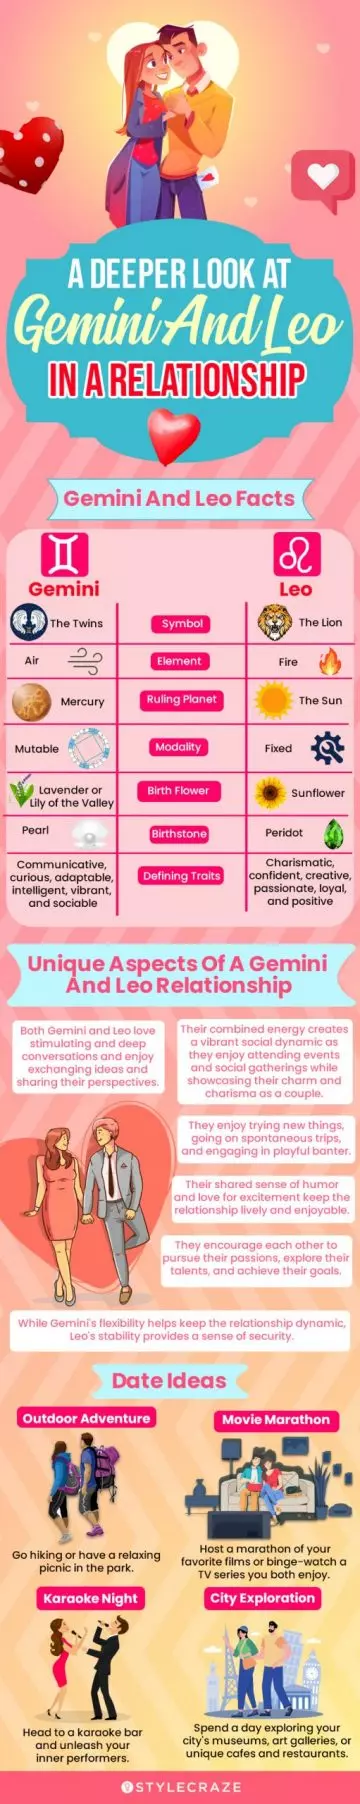 a deeper look at gemini and leo in a relationship(infographic)